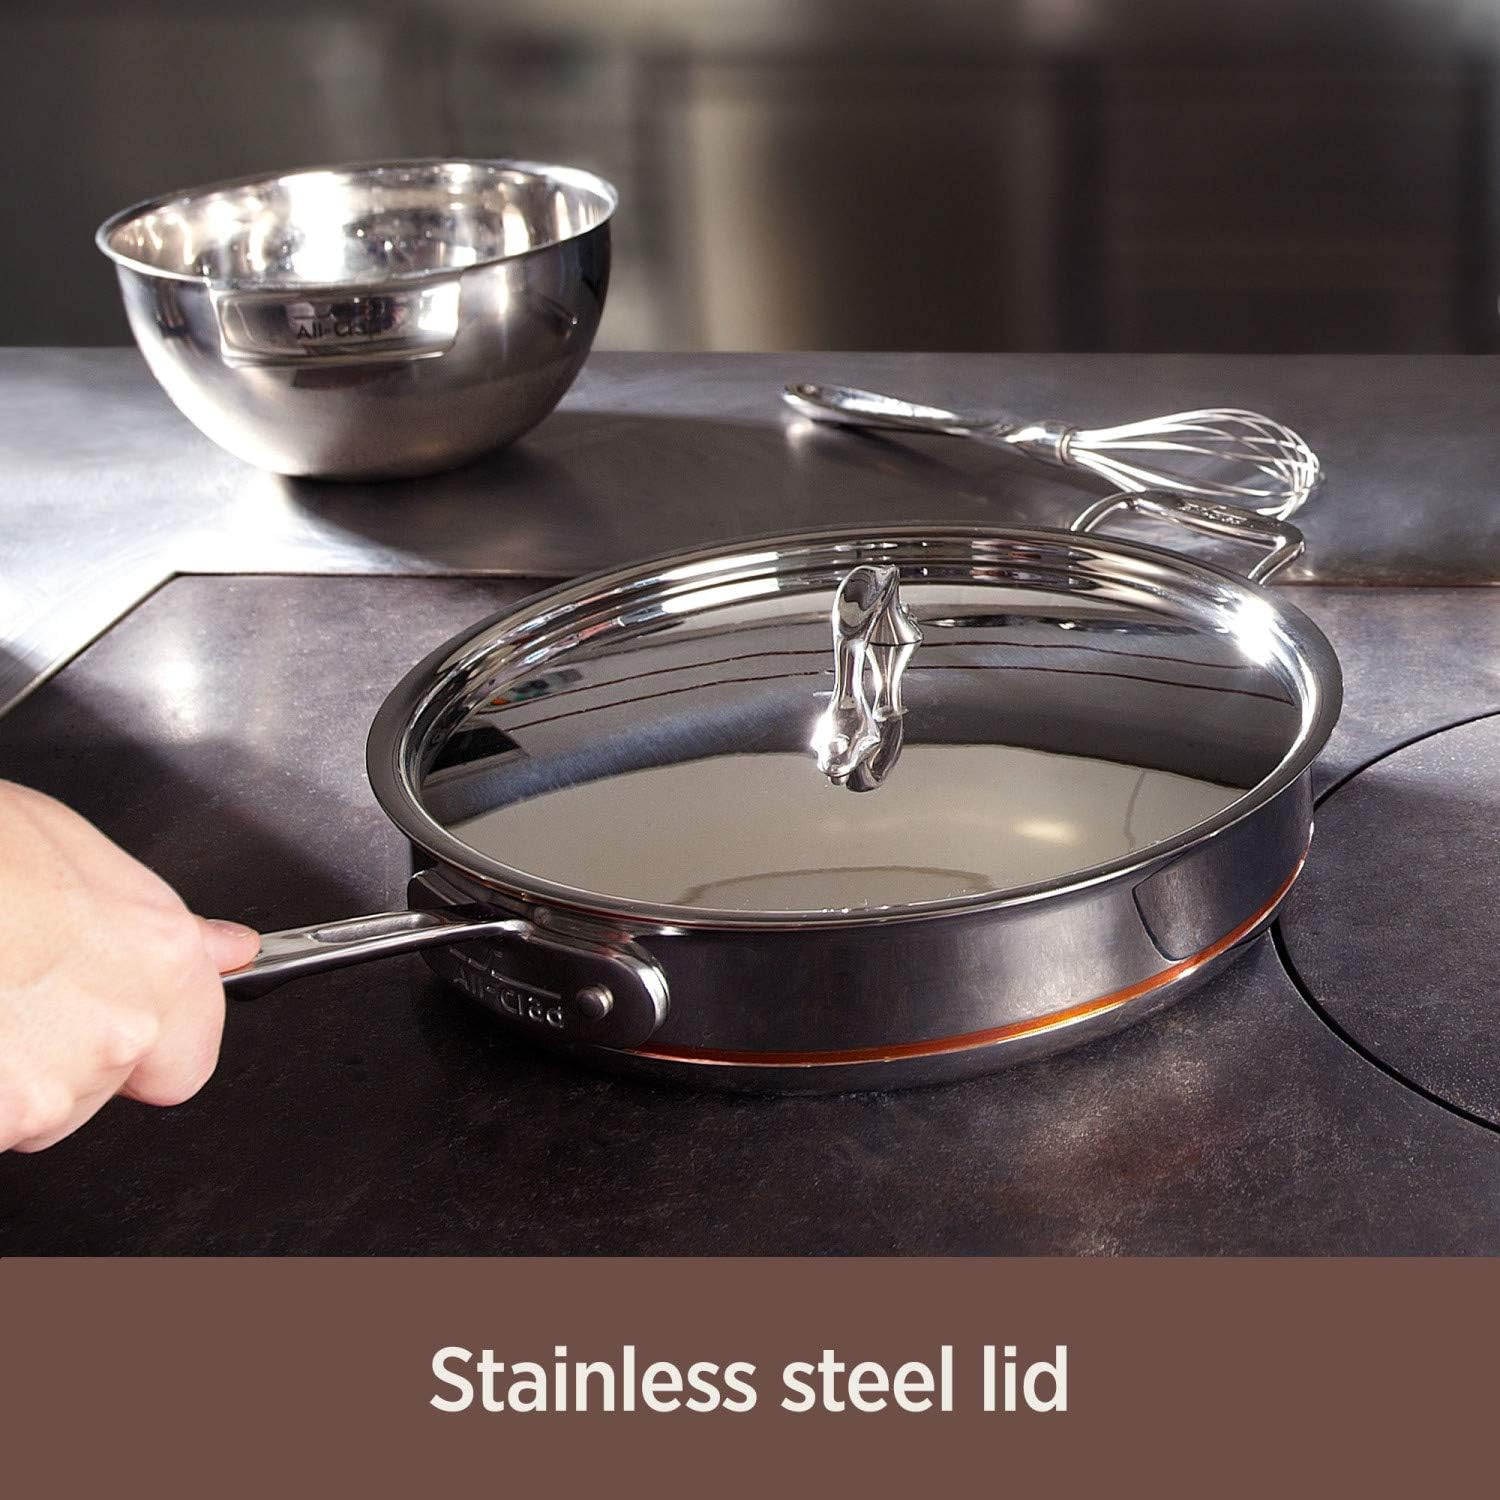 All-Clad Copper Core 5-Ply Stainless Steel Sauté Pan with Steel